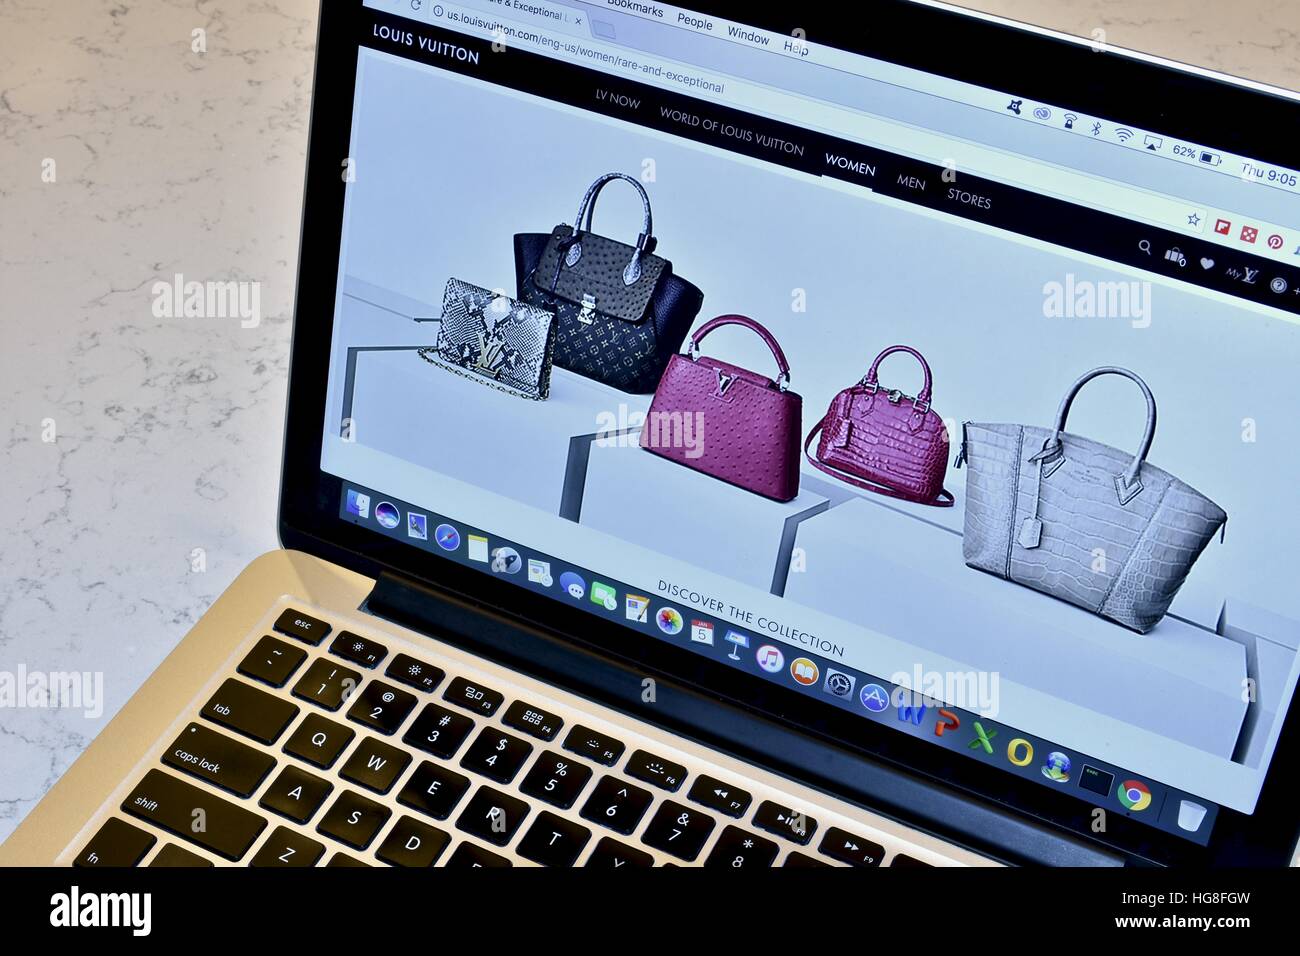 The Louis Vuitton website displayed on an Apple Macbook Pro Stock